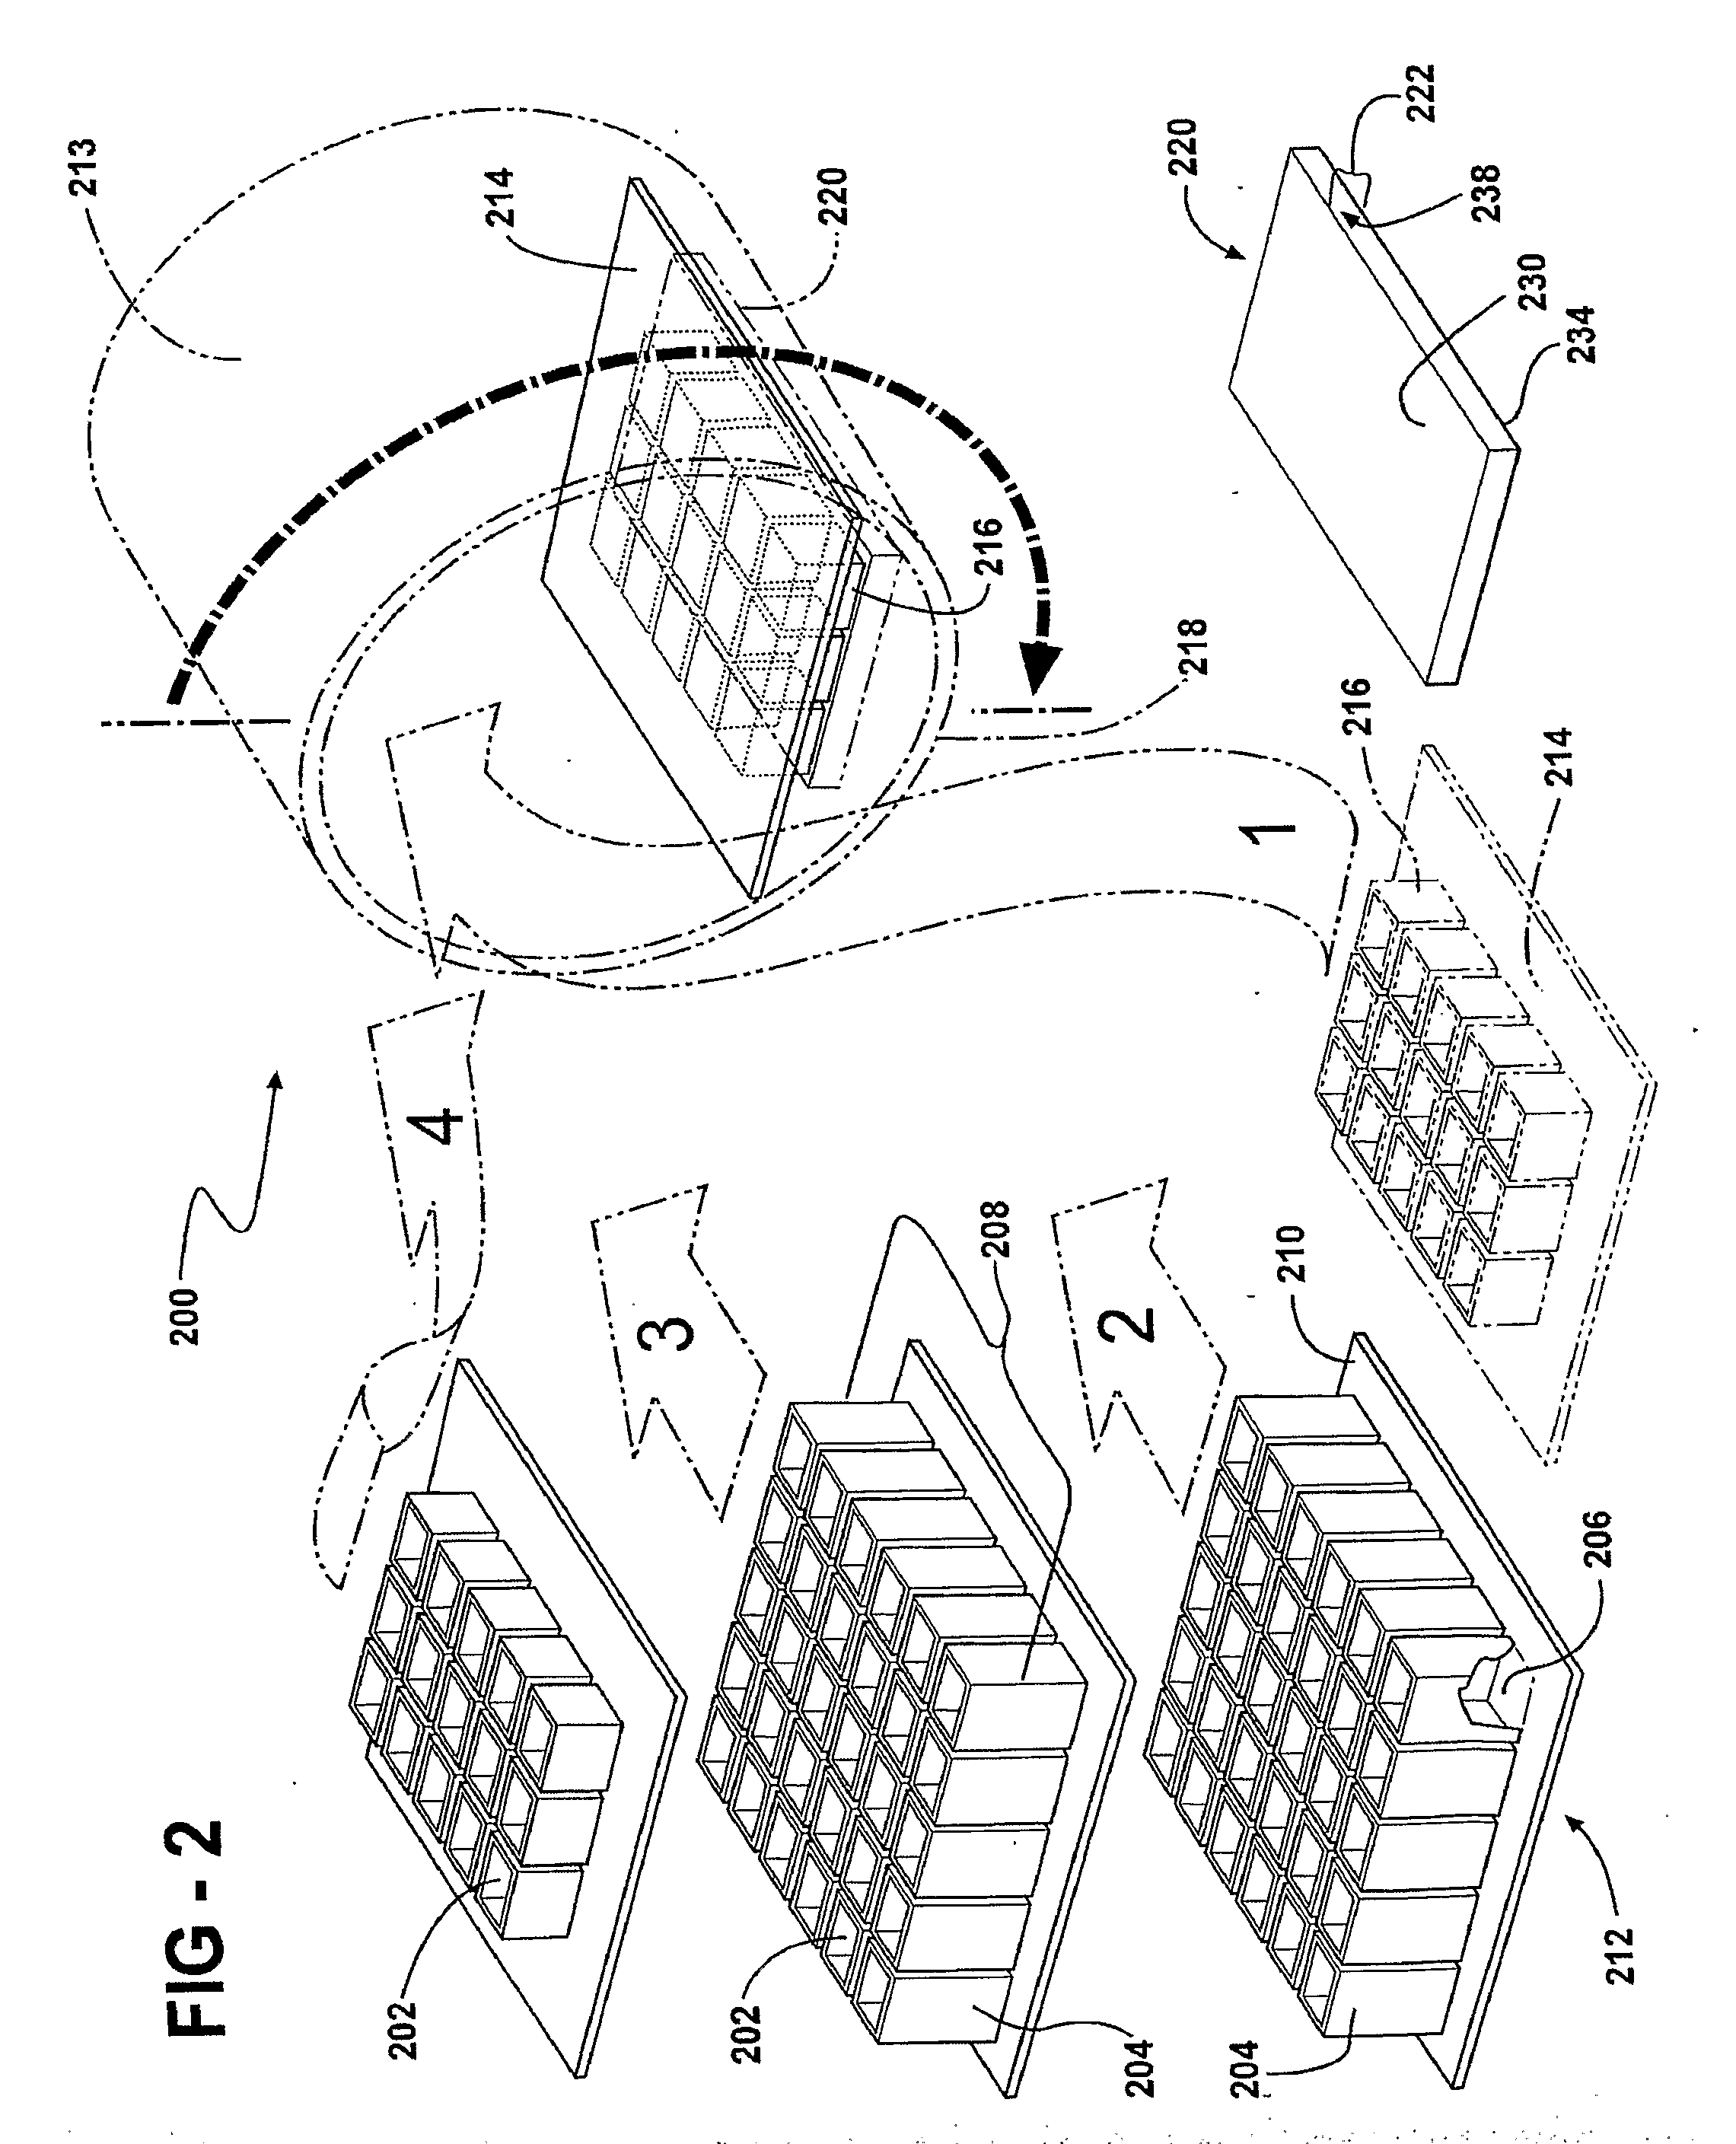 Process and apparatus for imaging